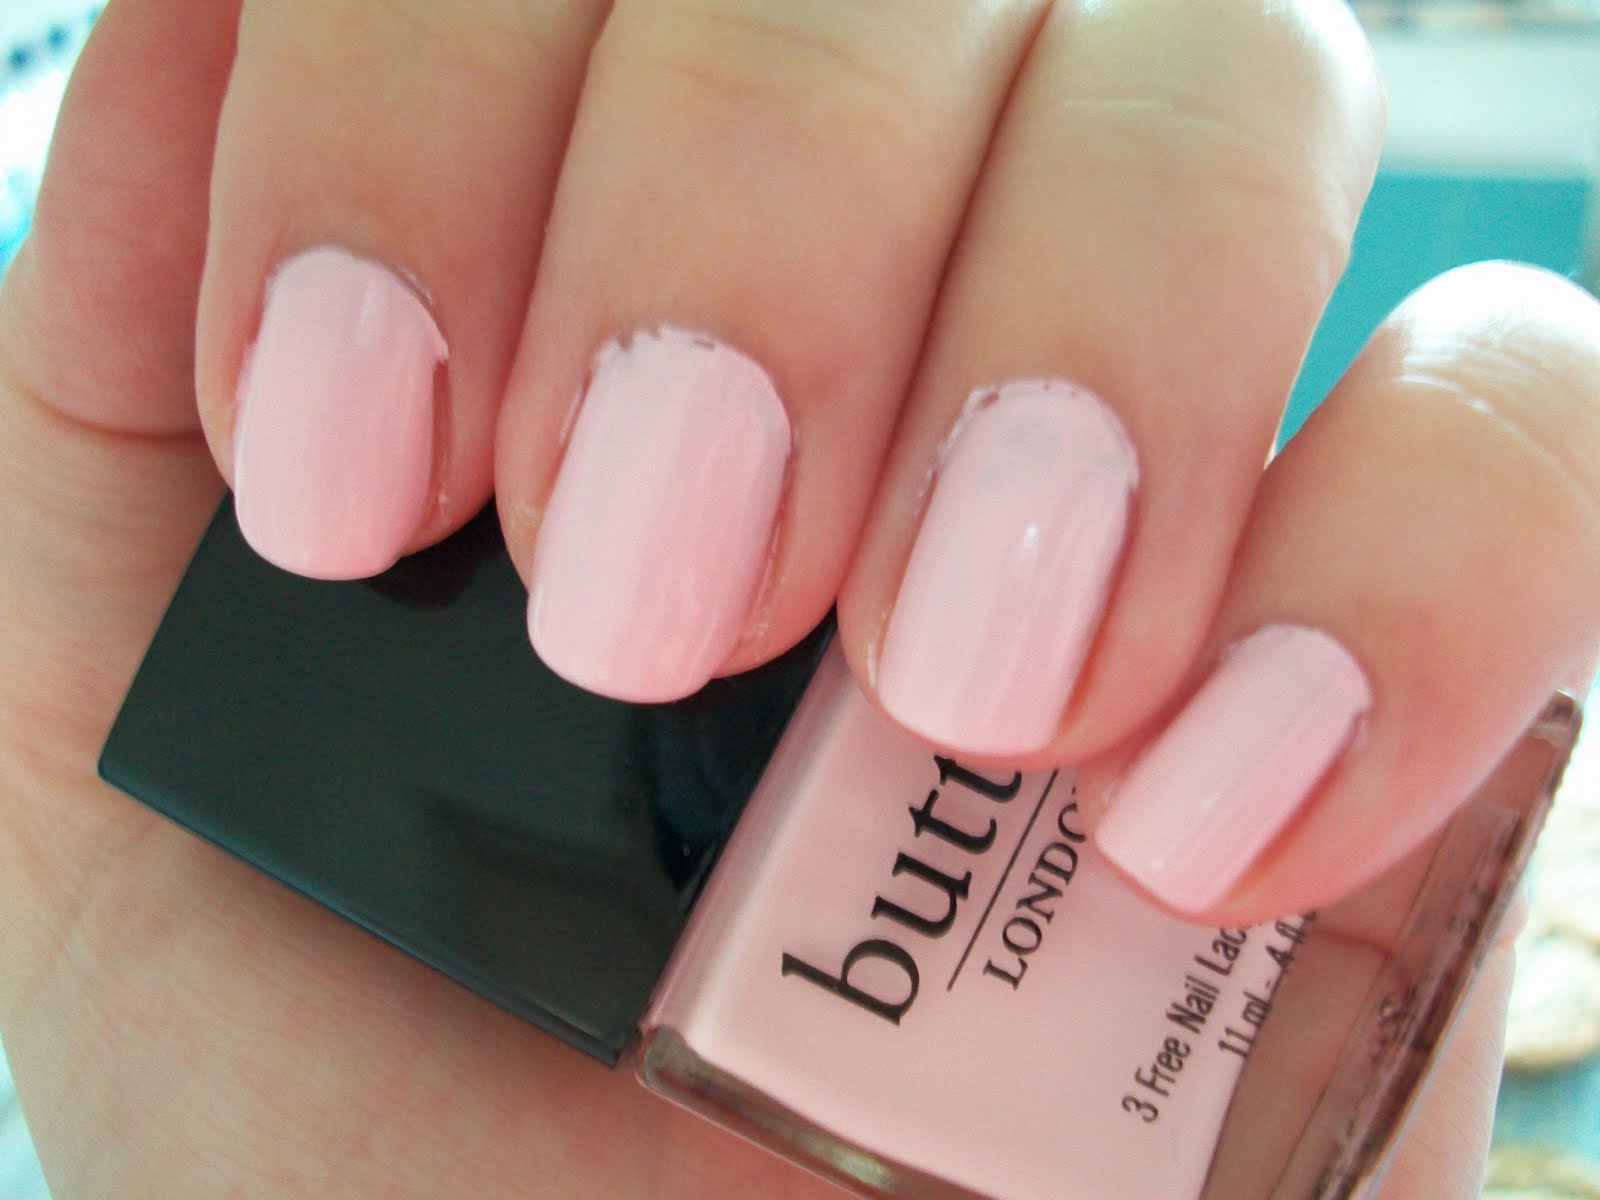 Butter London Nail Lacquer in Teddy Girl - wide 6